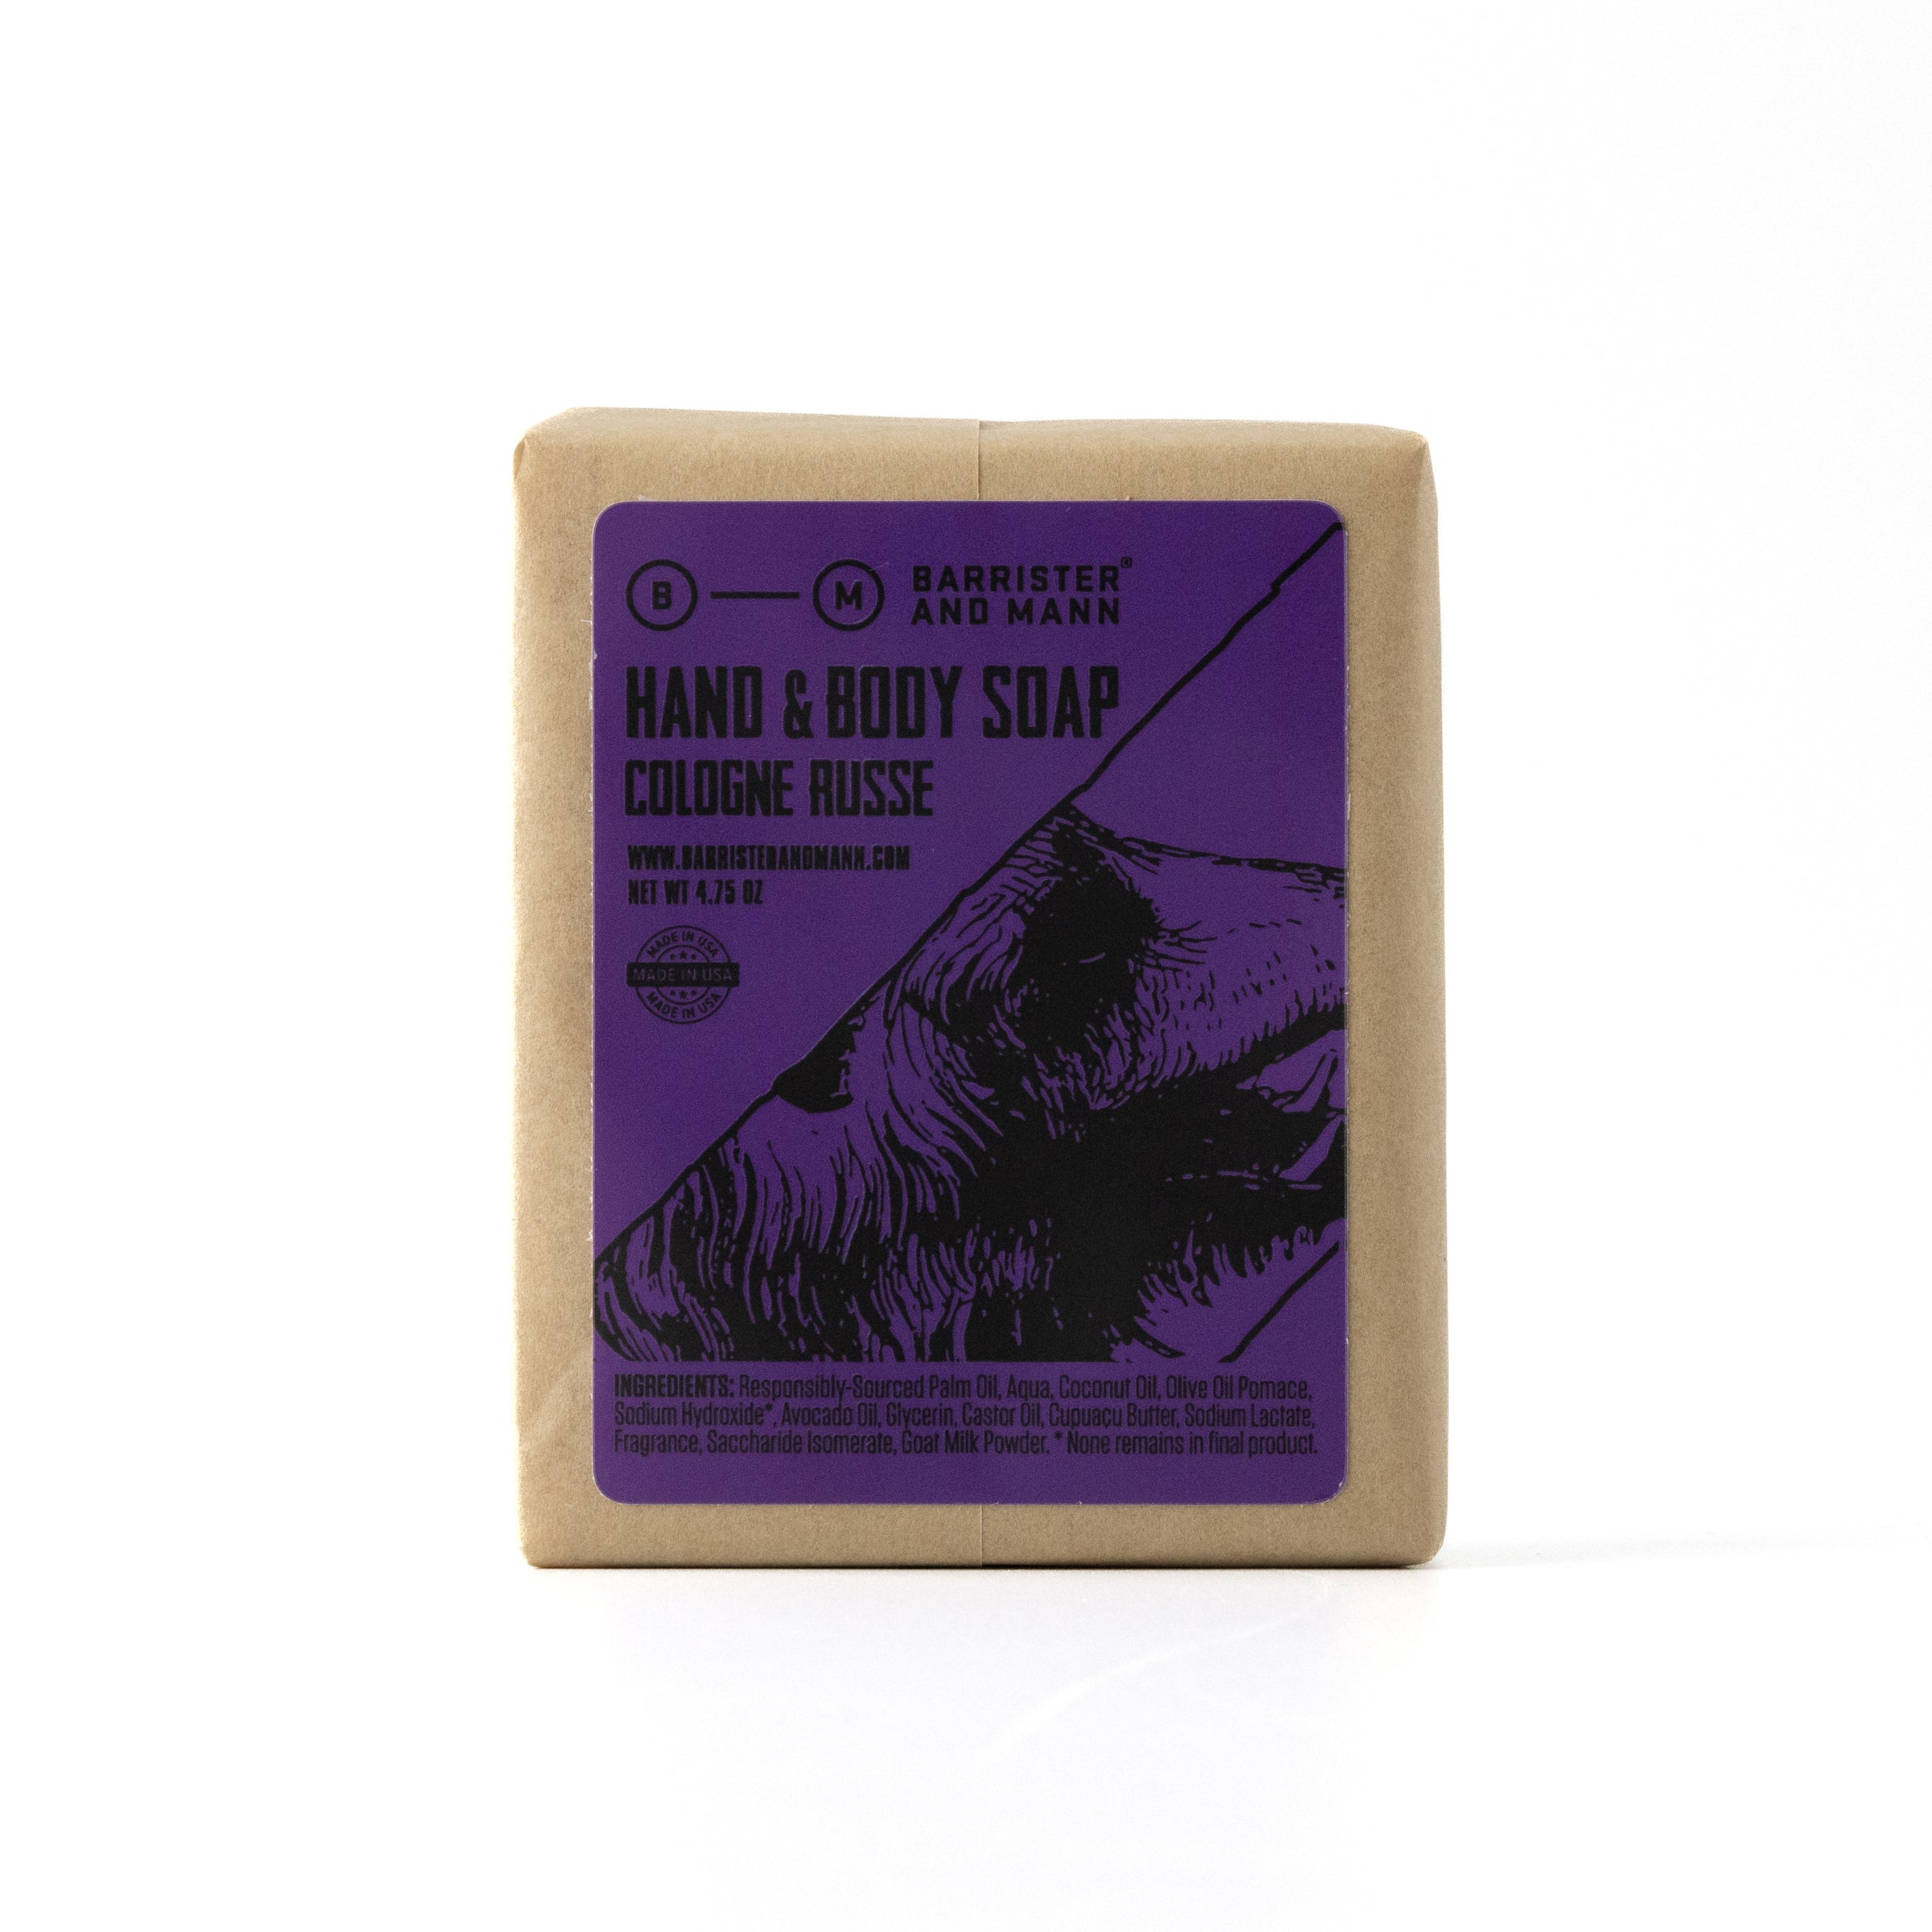 Hand &amp; Body Soap: Cologne Russe